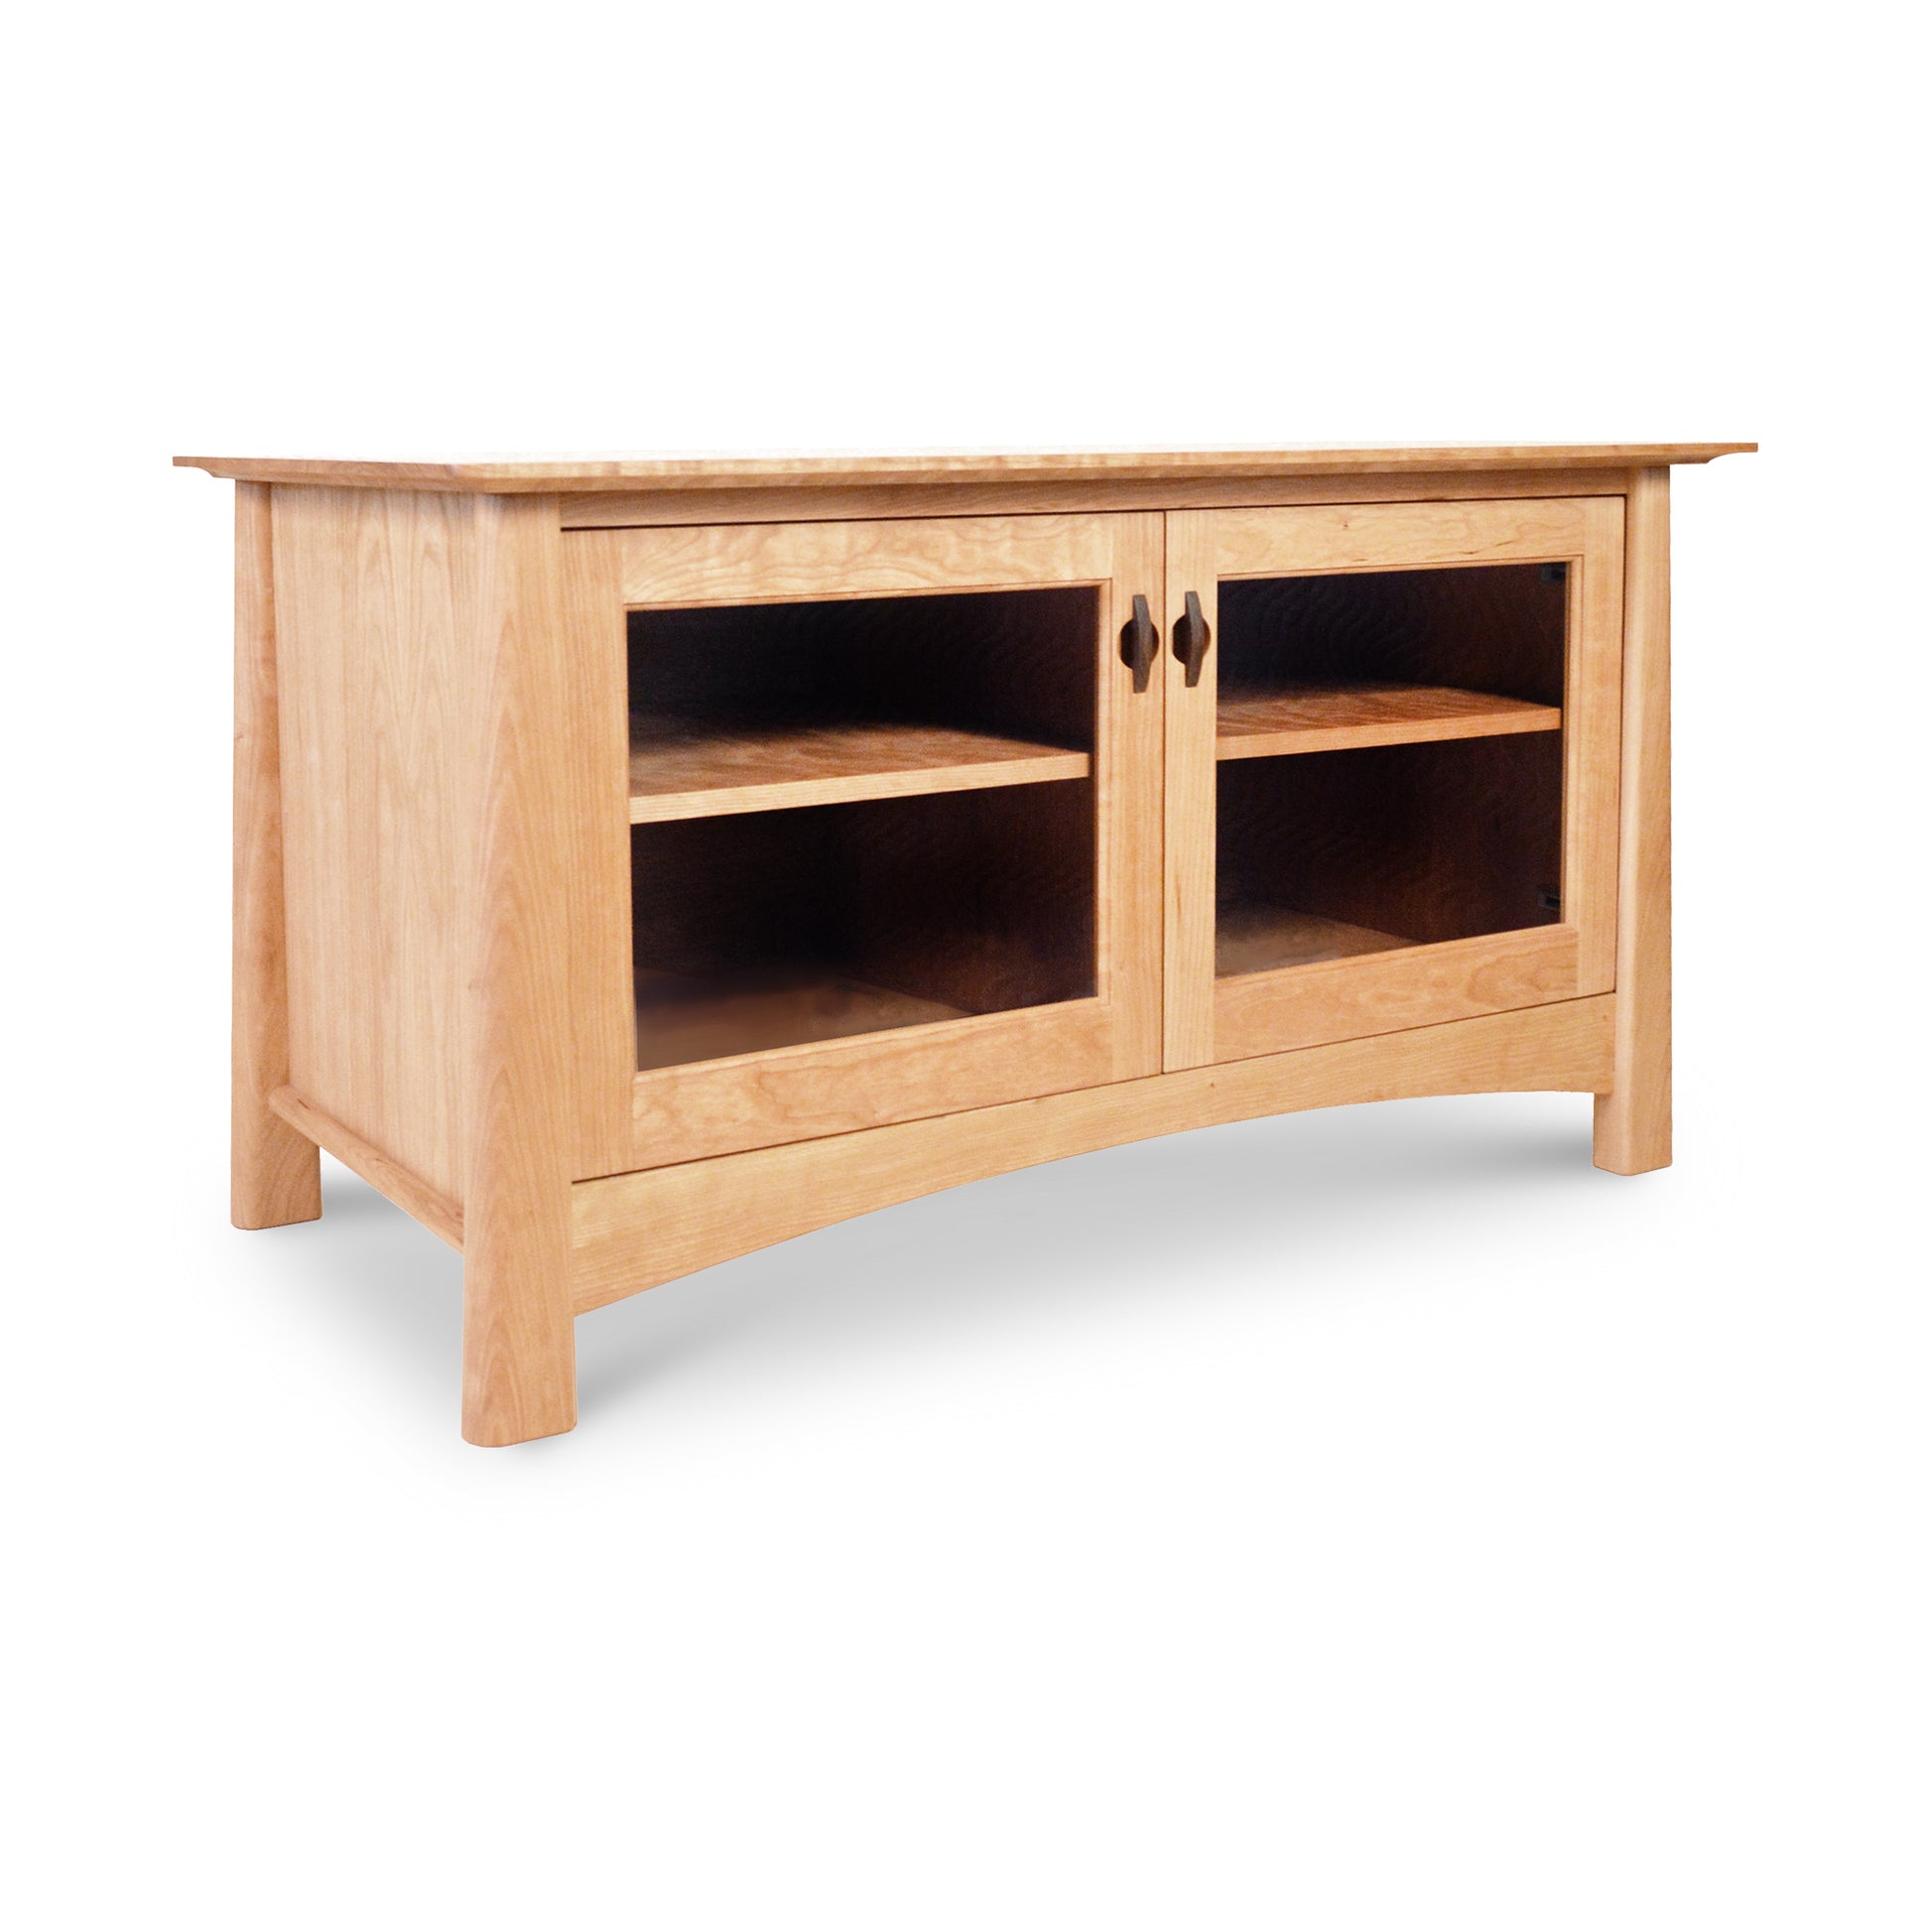 A Maple Corner Woodworks Cherry Moon 49" TV-Media Console with two central doors and visible interior shelves, crafted from light natural wood with an eco-friendly oil finish. The stand is photographed on a white background.